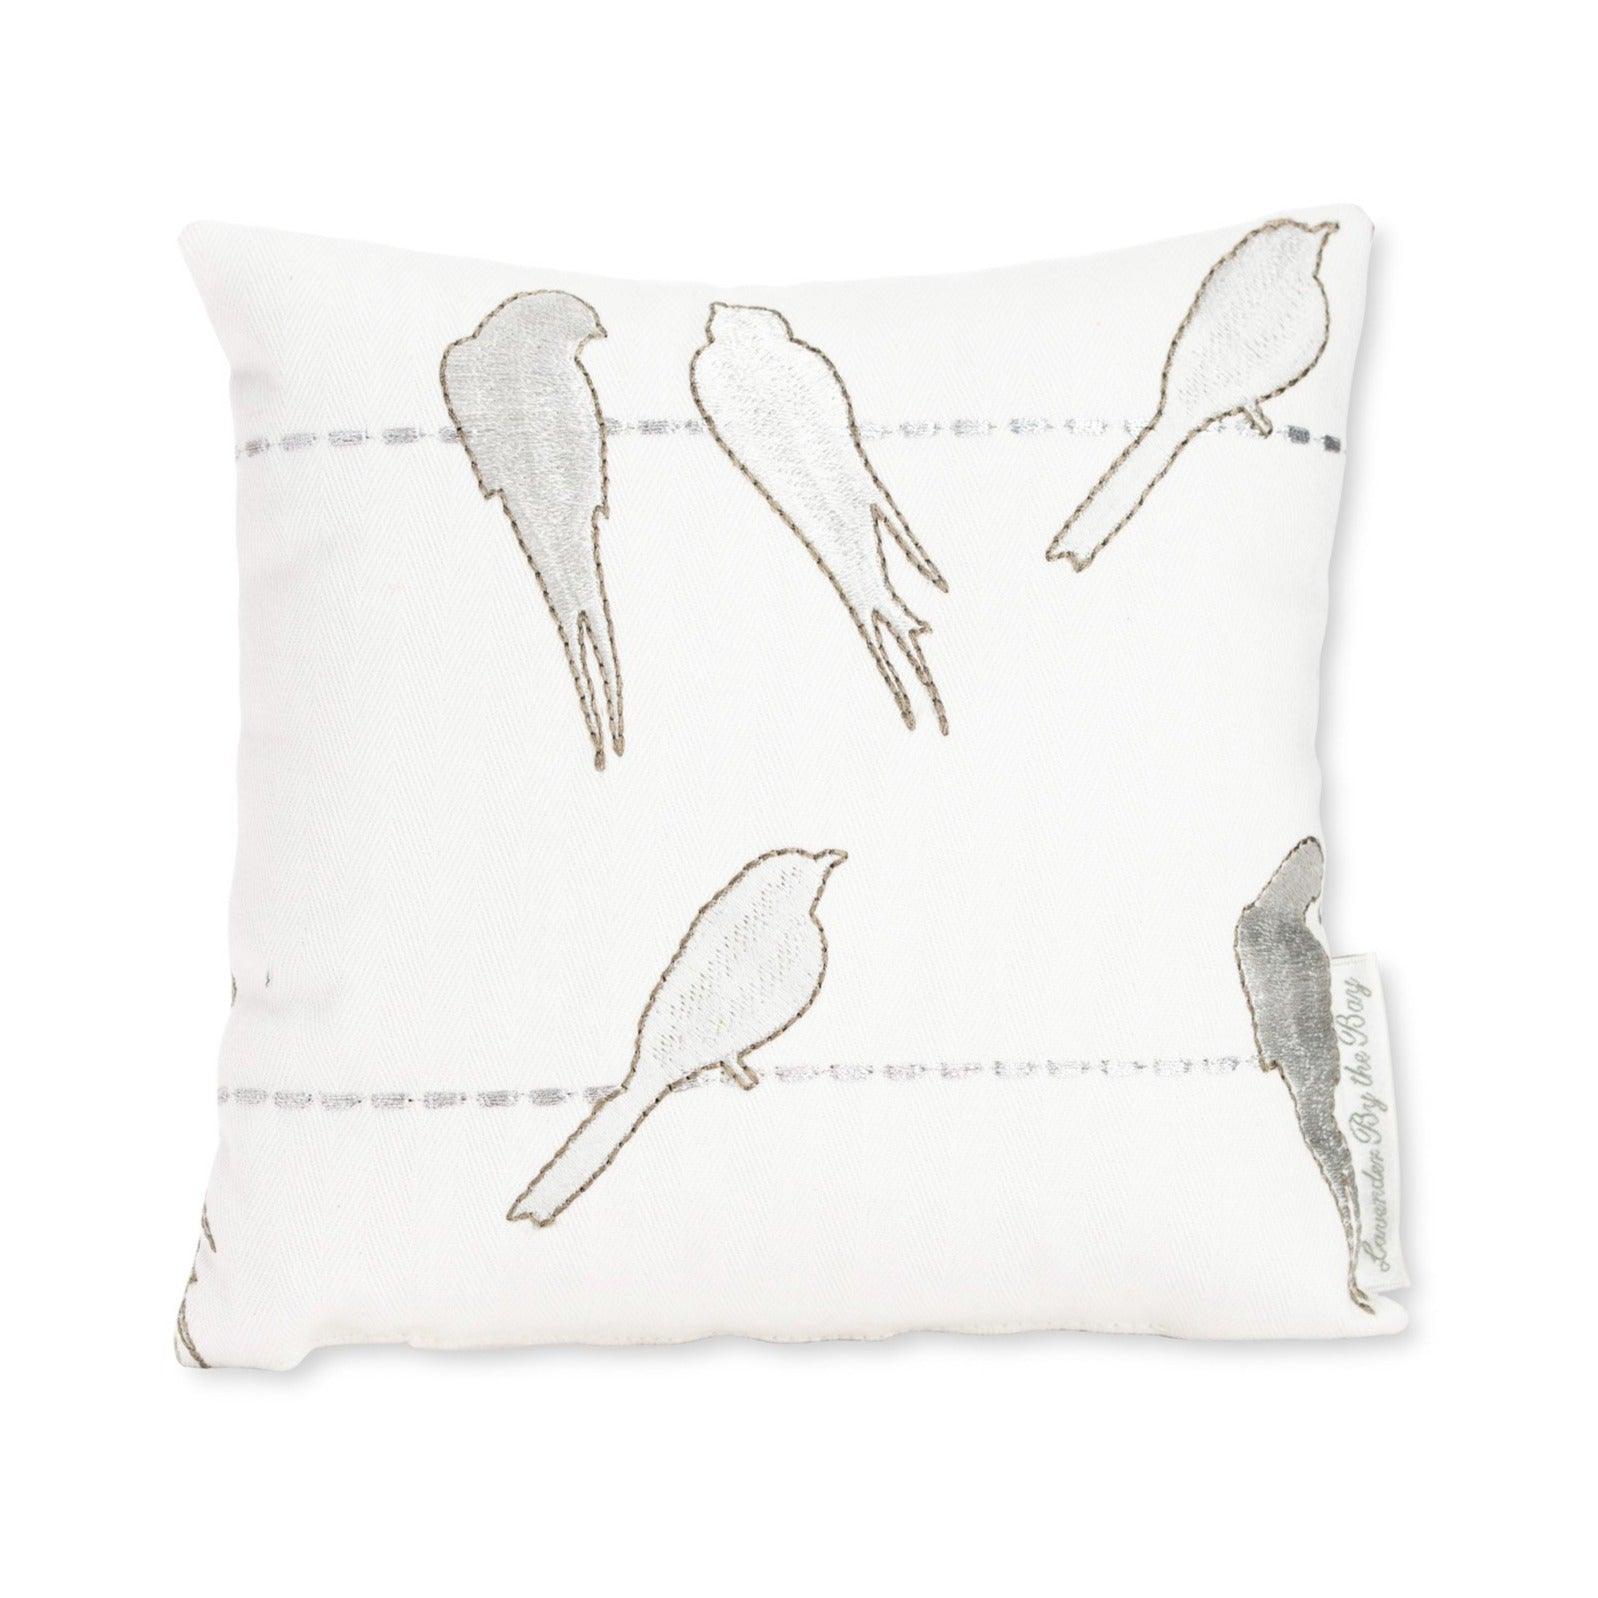 Embroidered bird pillow - Lavender by the bay